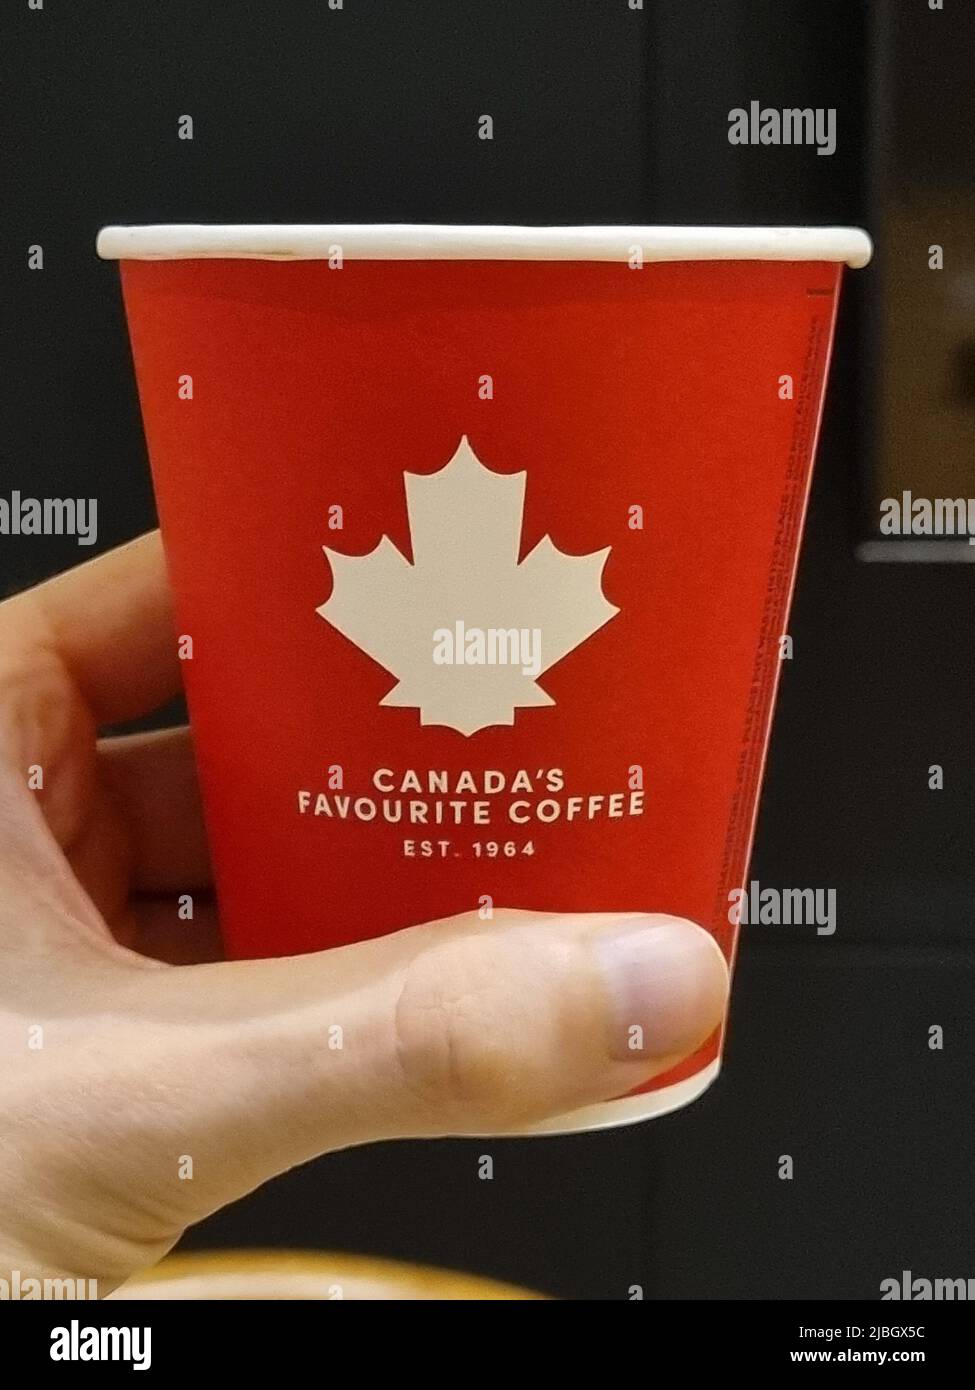 Tim Hortons coffee cup close-up shot Stock Photo